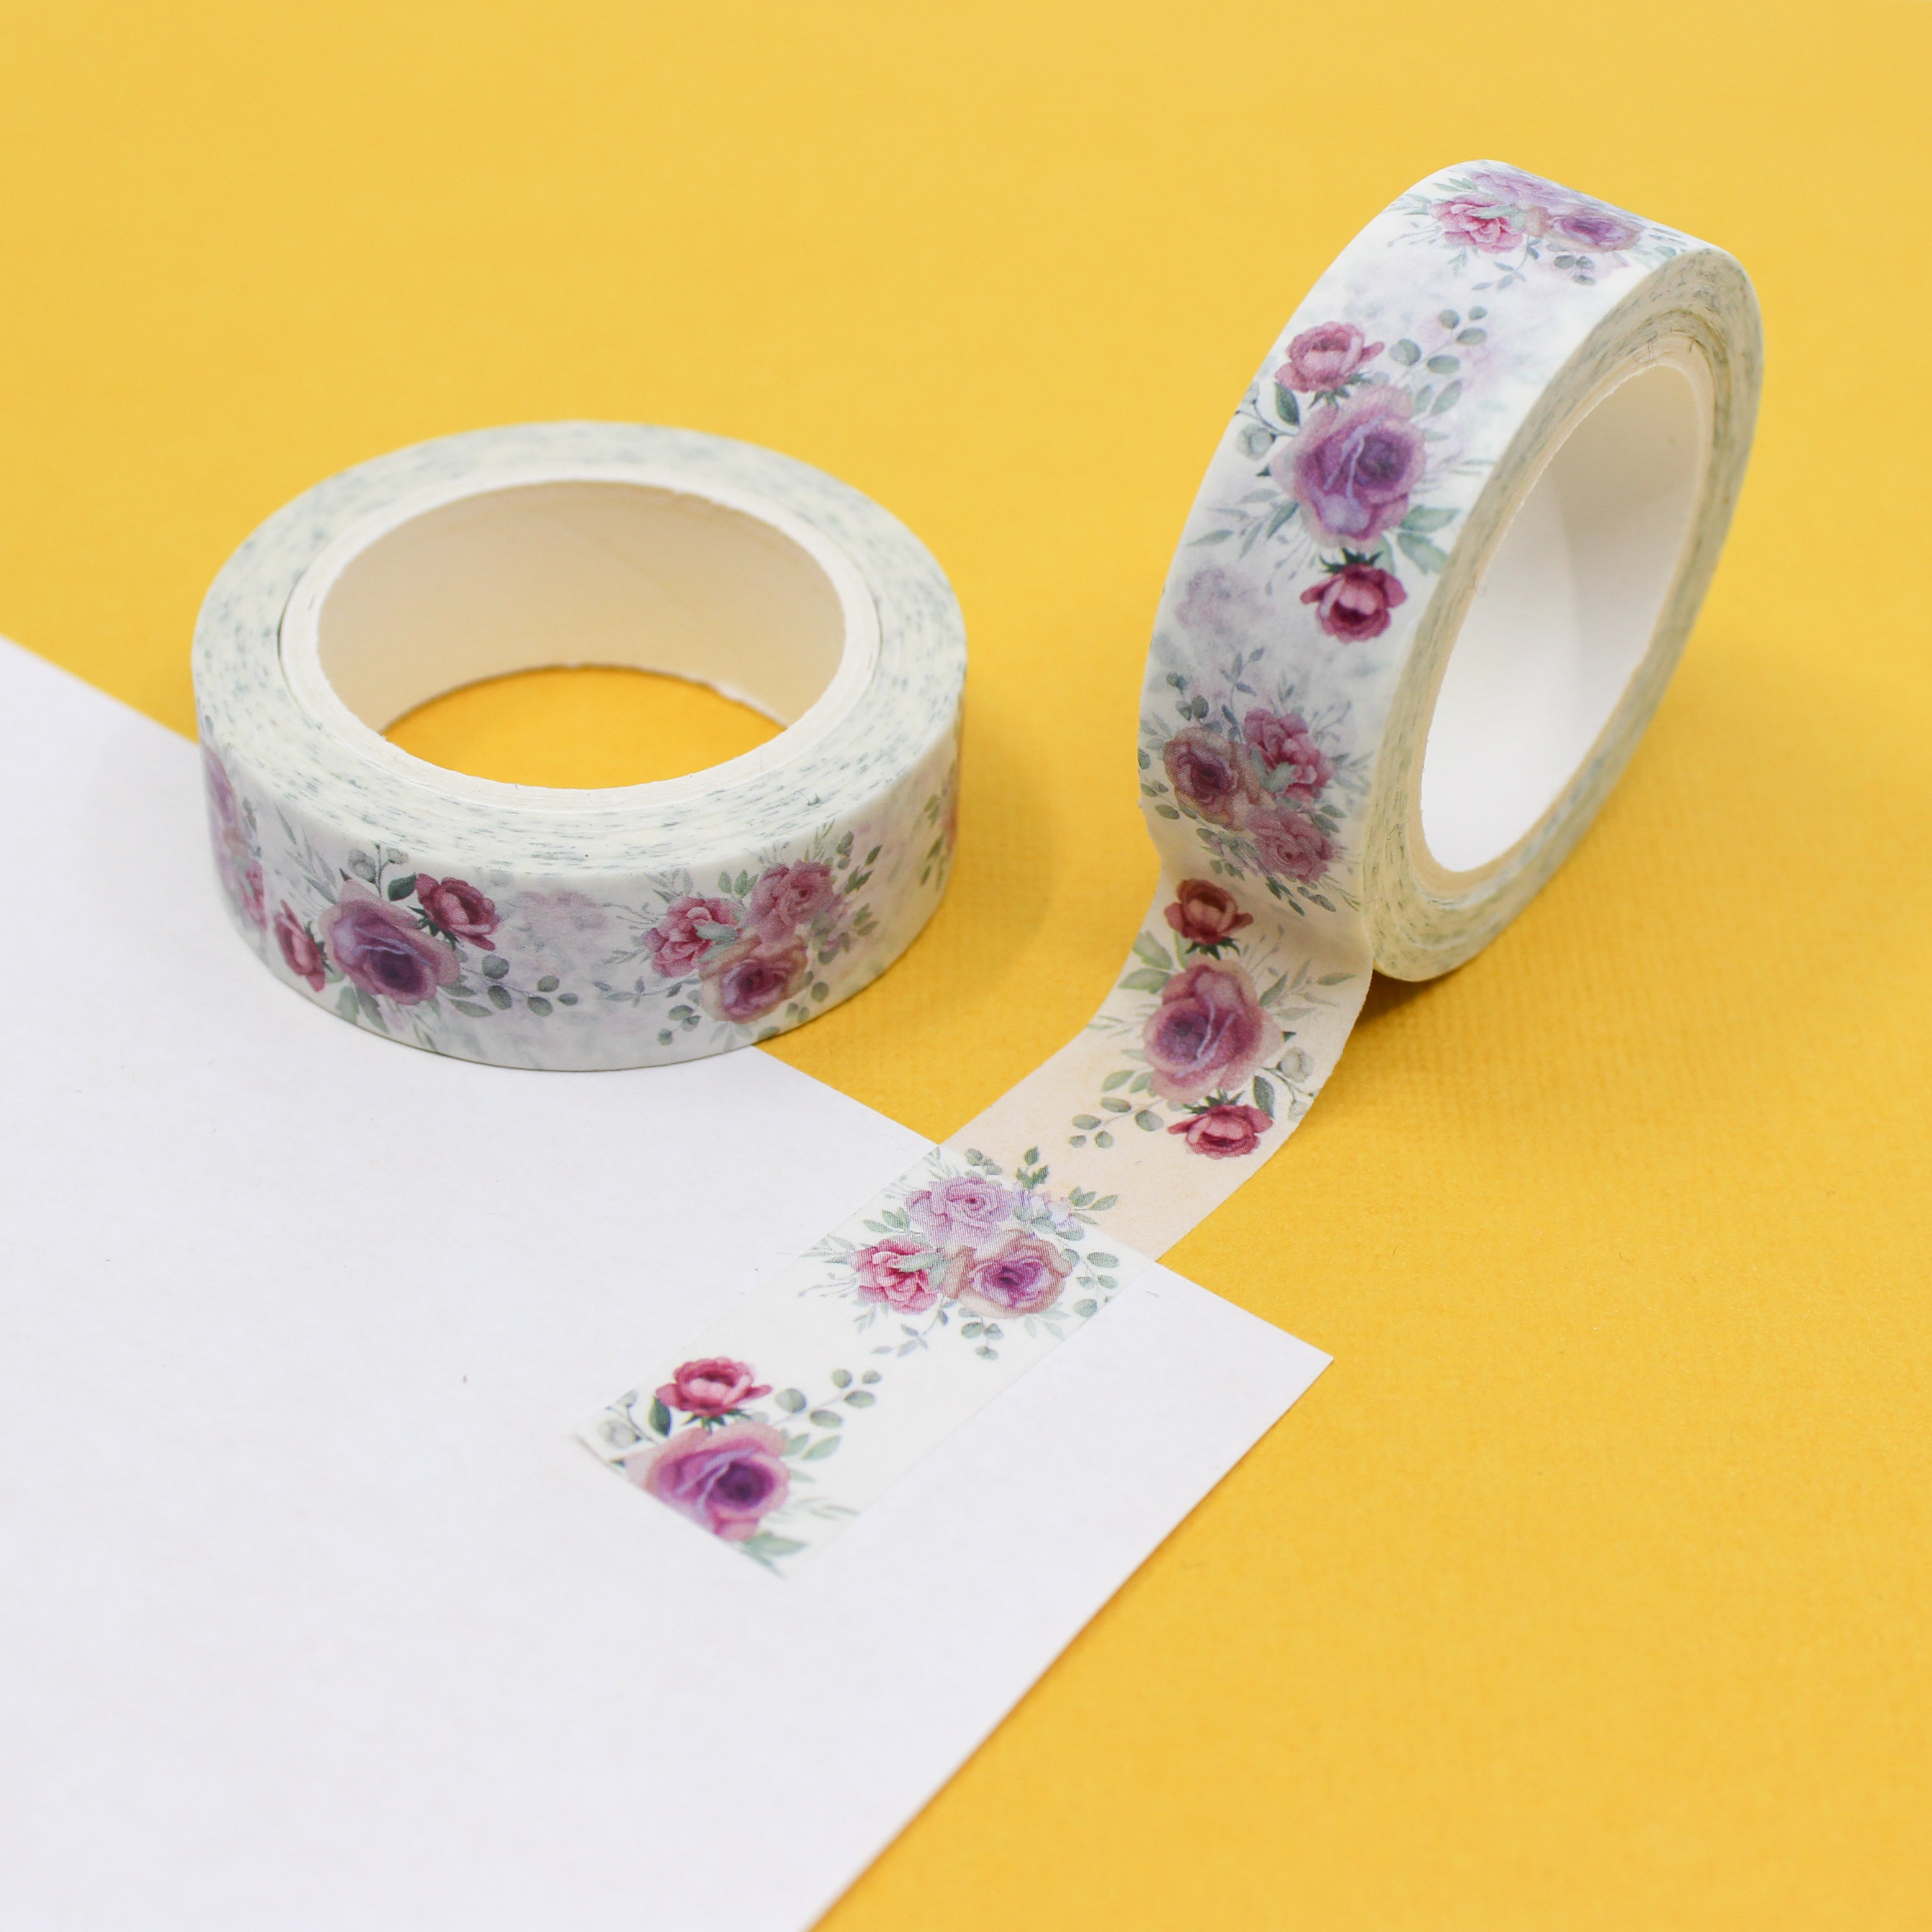 This is a vintage roses flower pattern washi tape from BBB Supplies Craft Shop